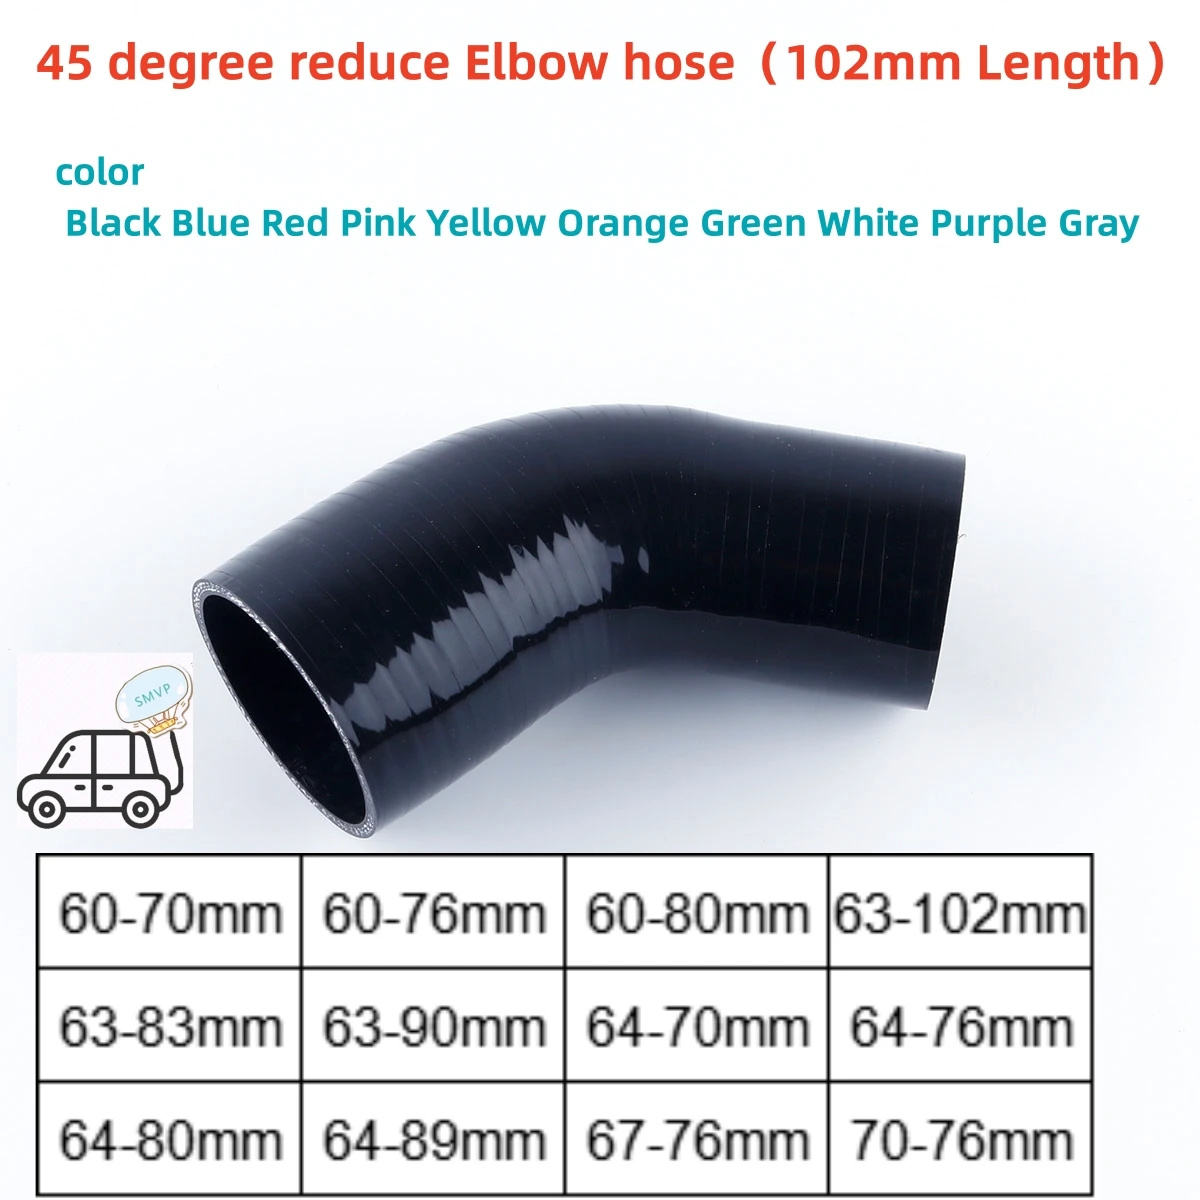 

45 degree reducer elbow Silicone hose COUPLER intercooler 3-ply ID 60-70mm 60-76mm 60-80 63-83 63 64 67 70 76 80 83 89 90 102mm